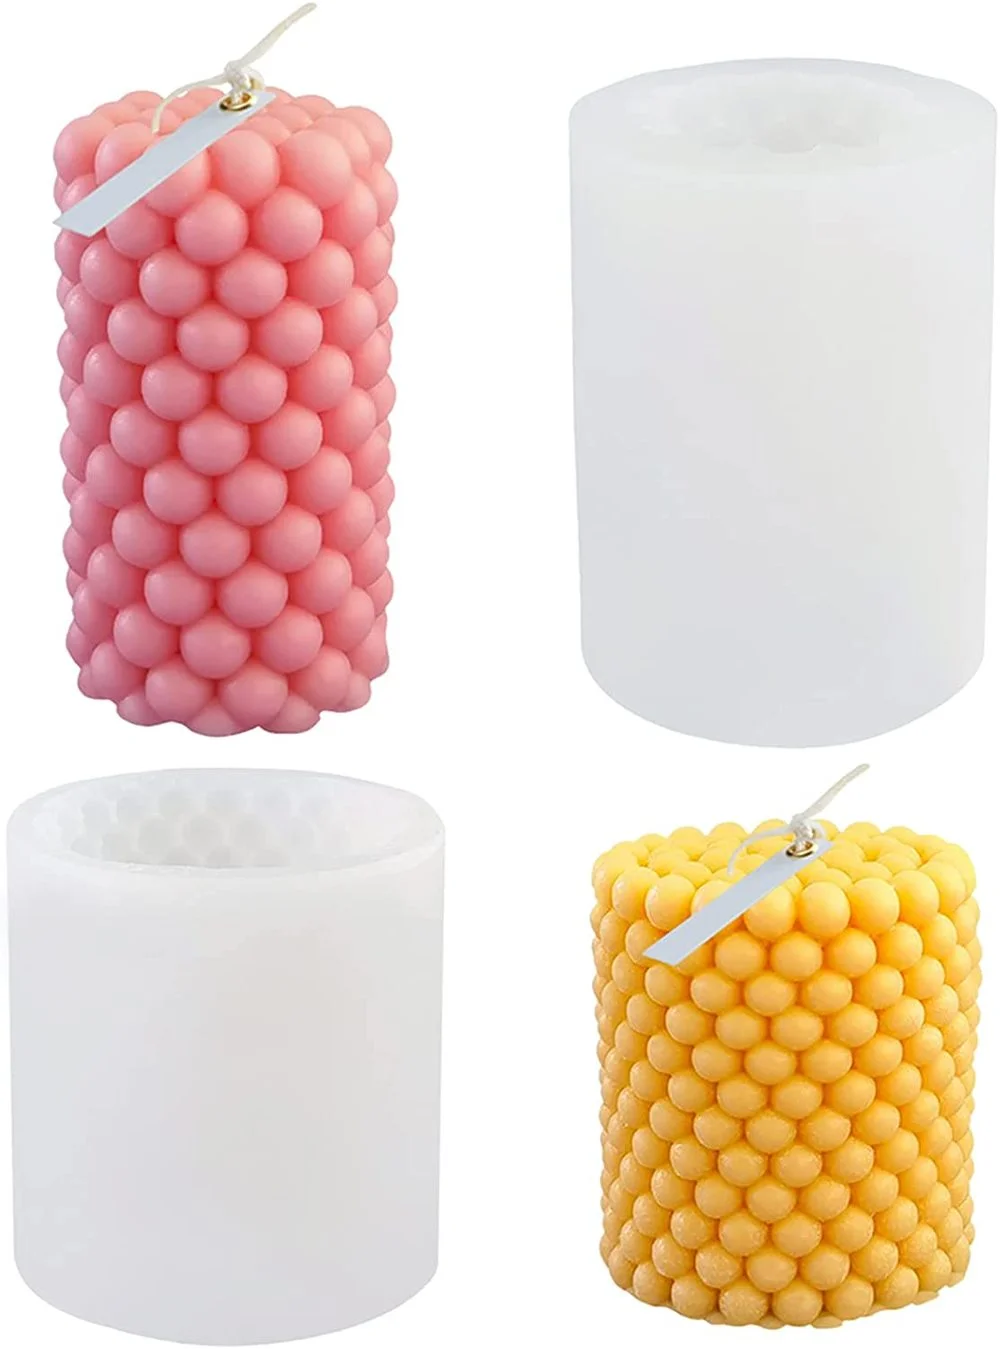 

3D Cylindrical Aromatherapy Candle Silicone Mold DIY Handmade Soap Plaster Epoxy Resin Mould Handcraft Aroma Soy Wax Making